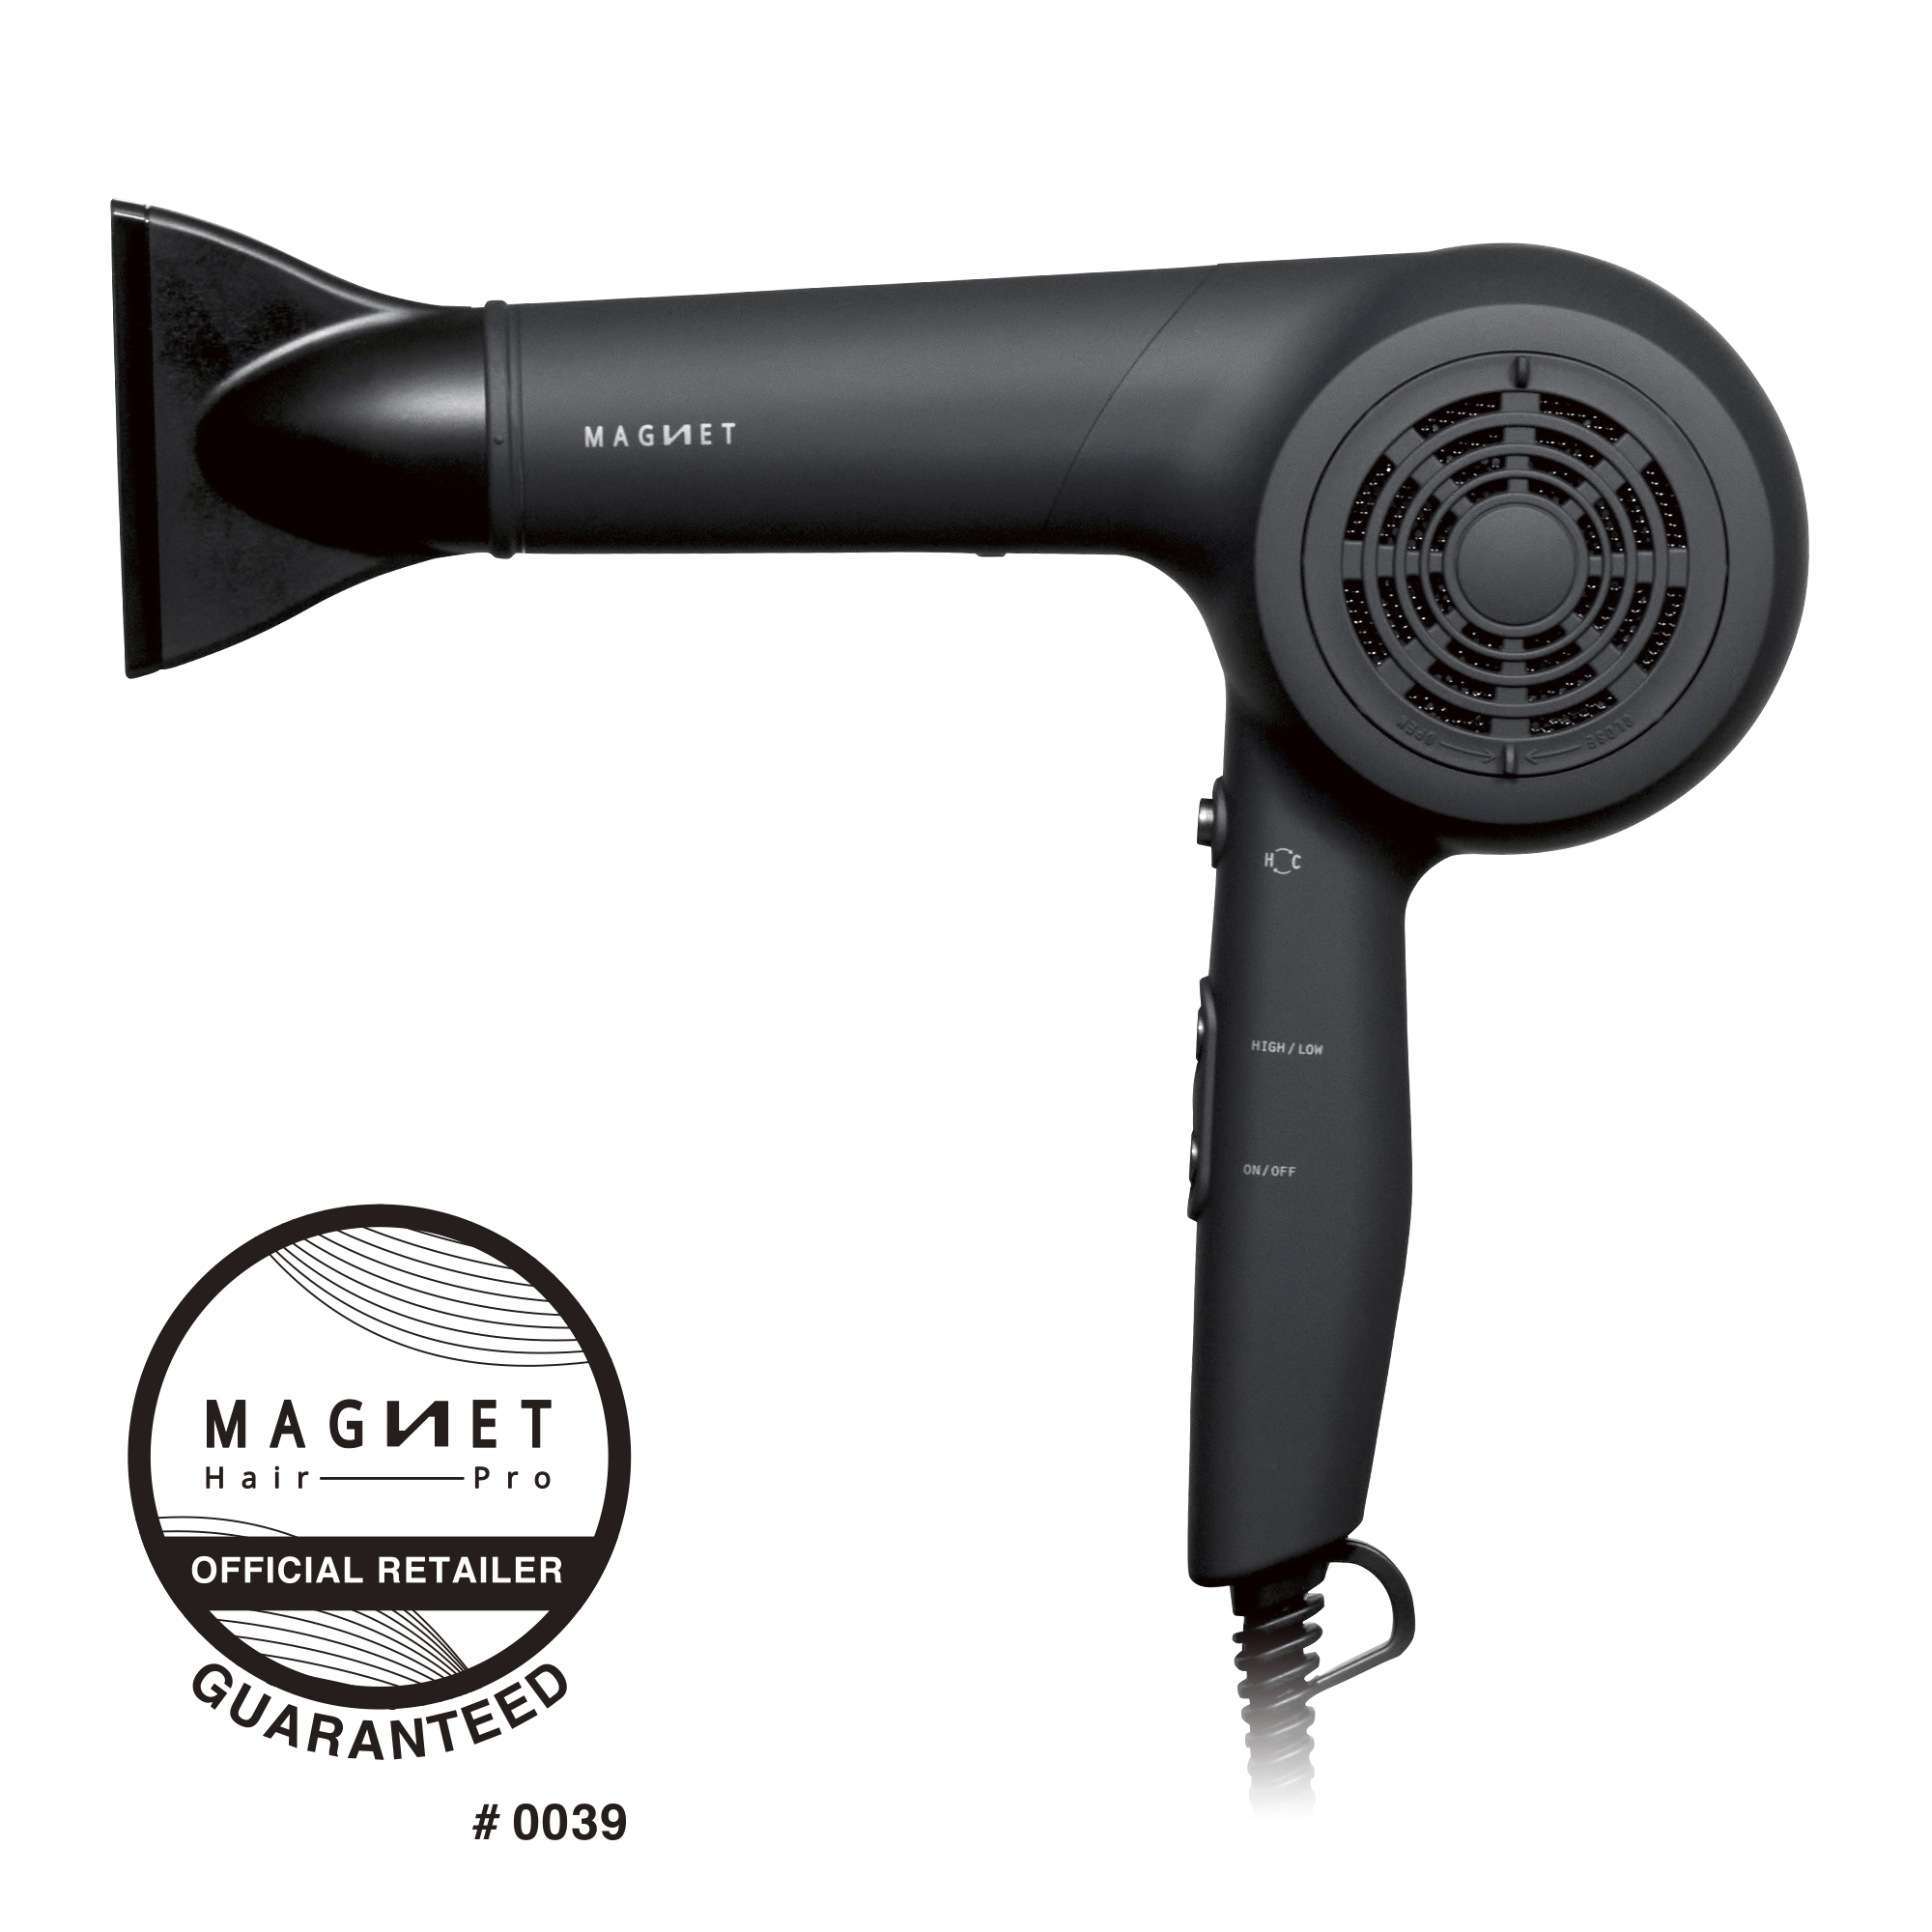 HOLISTIC cures　MAGNETHairPro DRYER AIRY